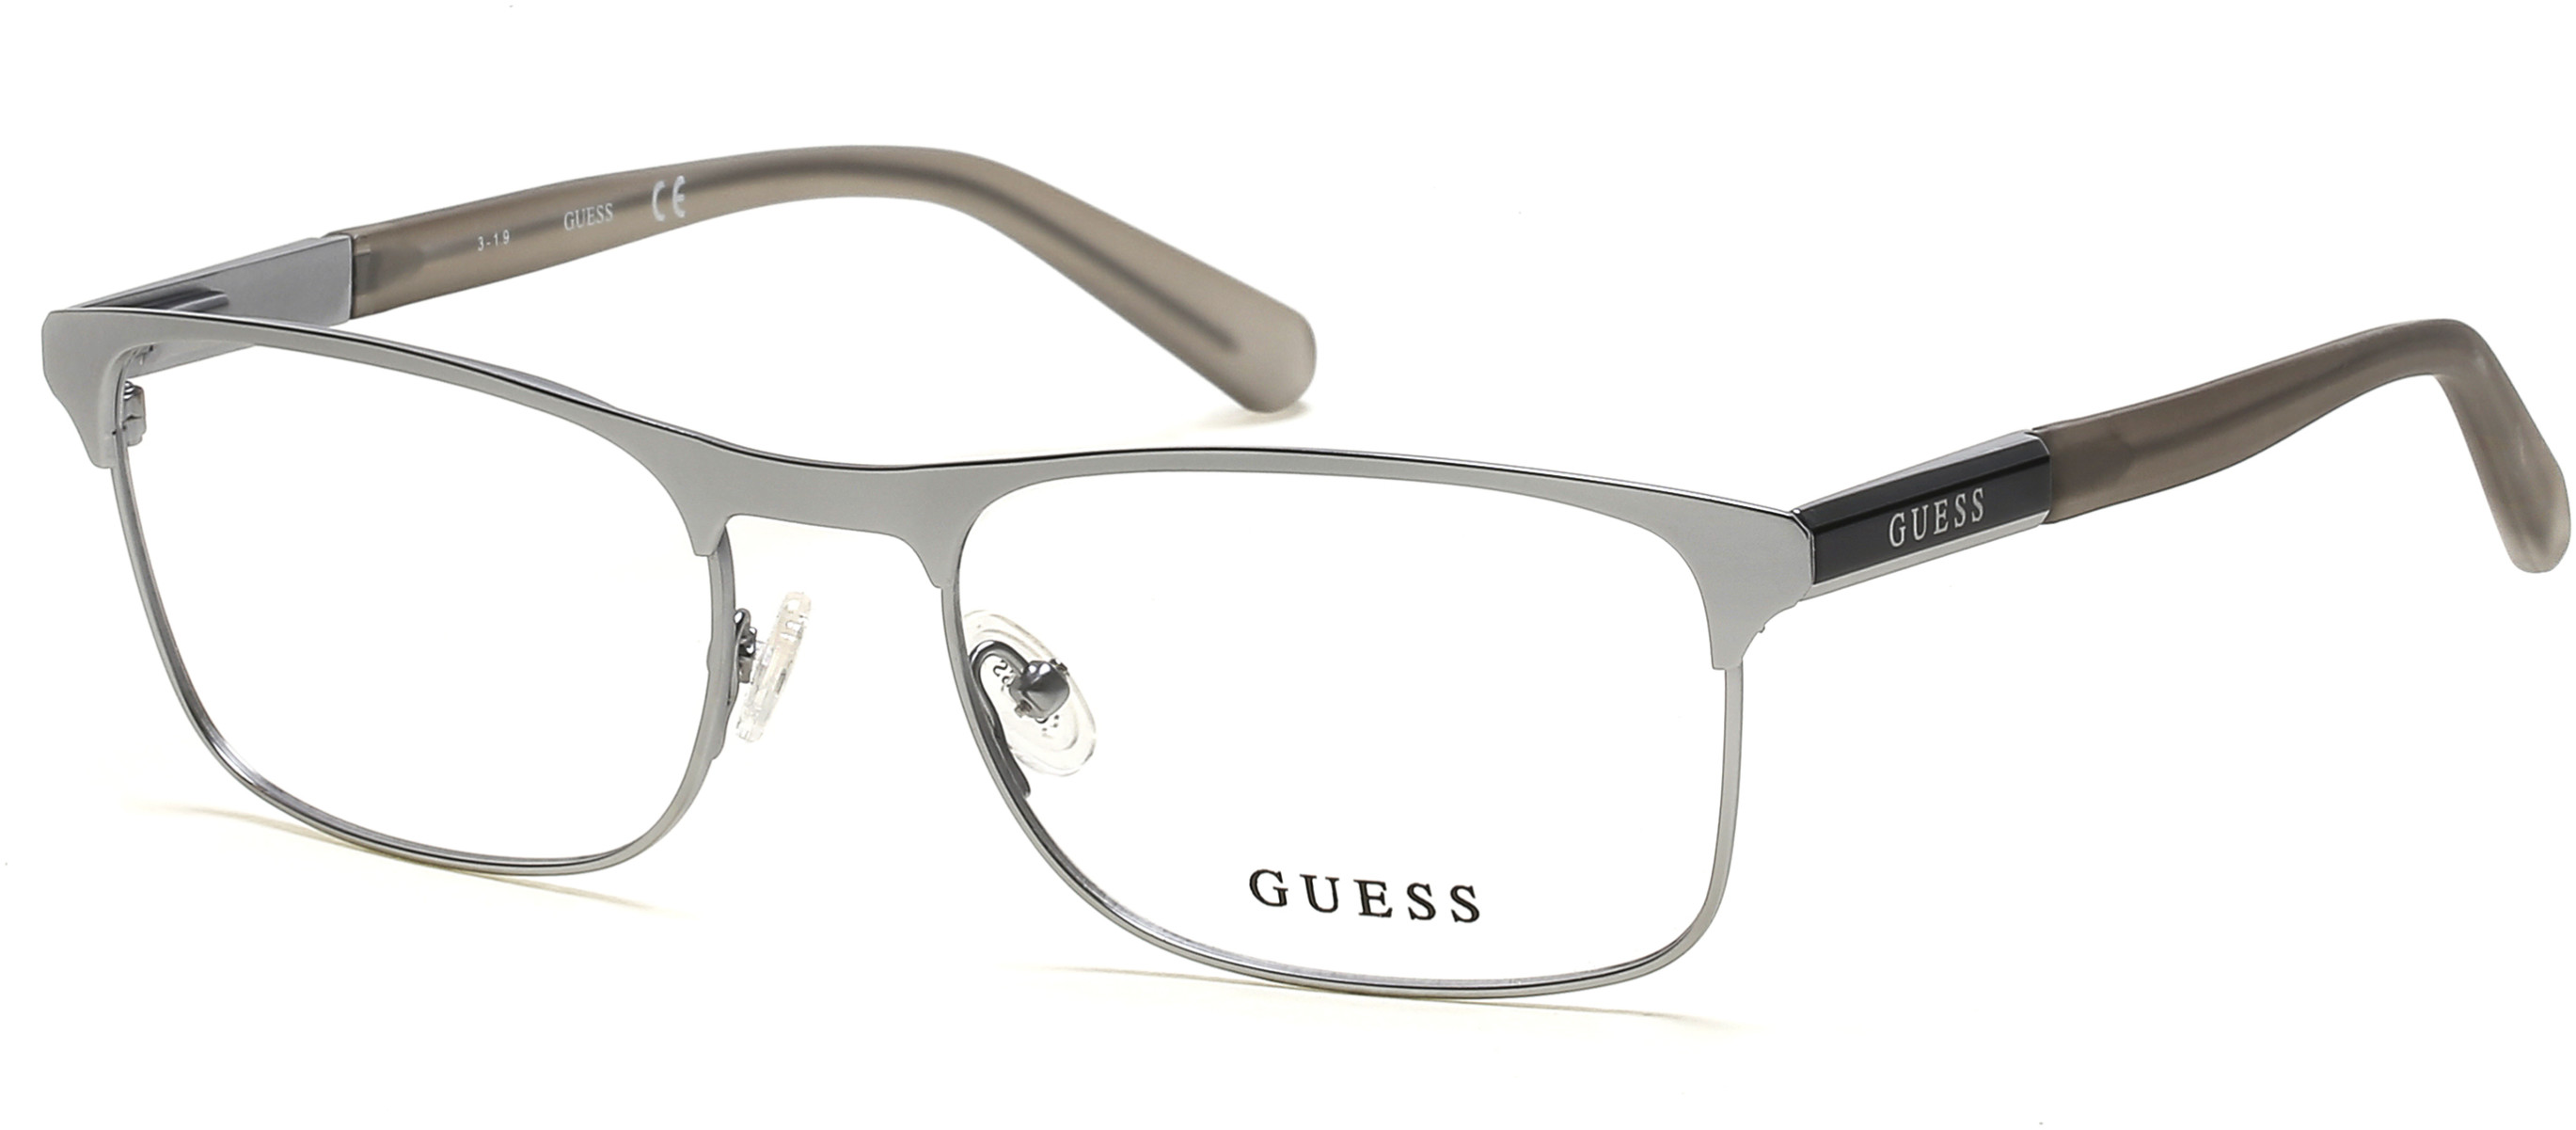 GUESS 1981 007